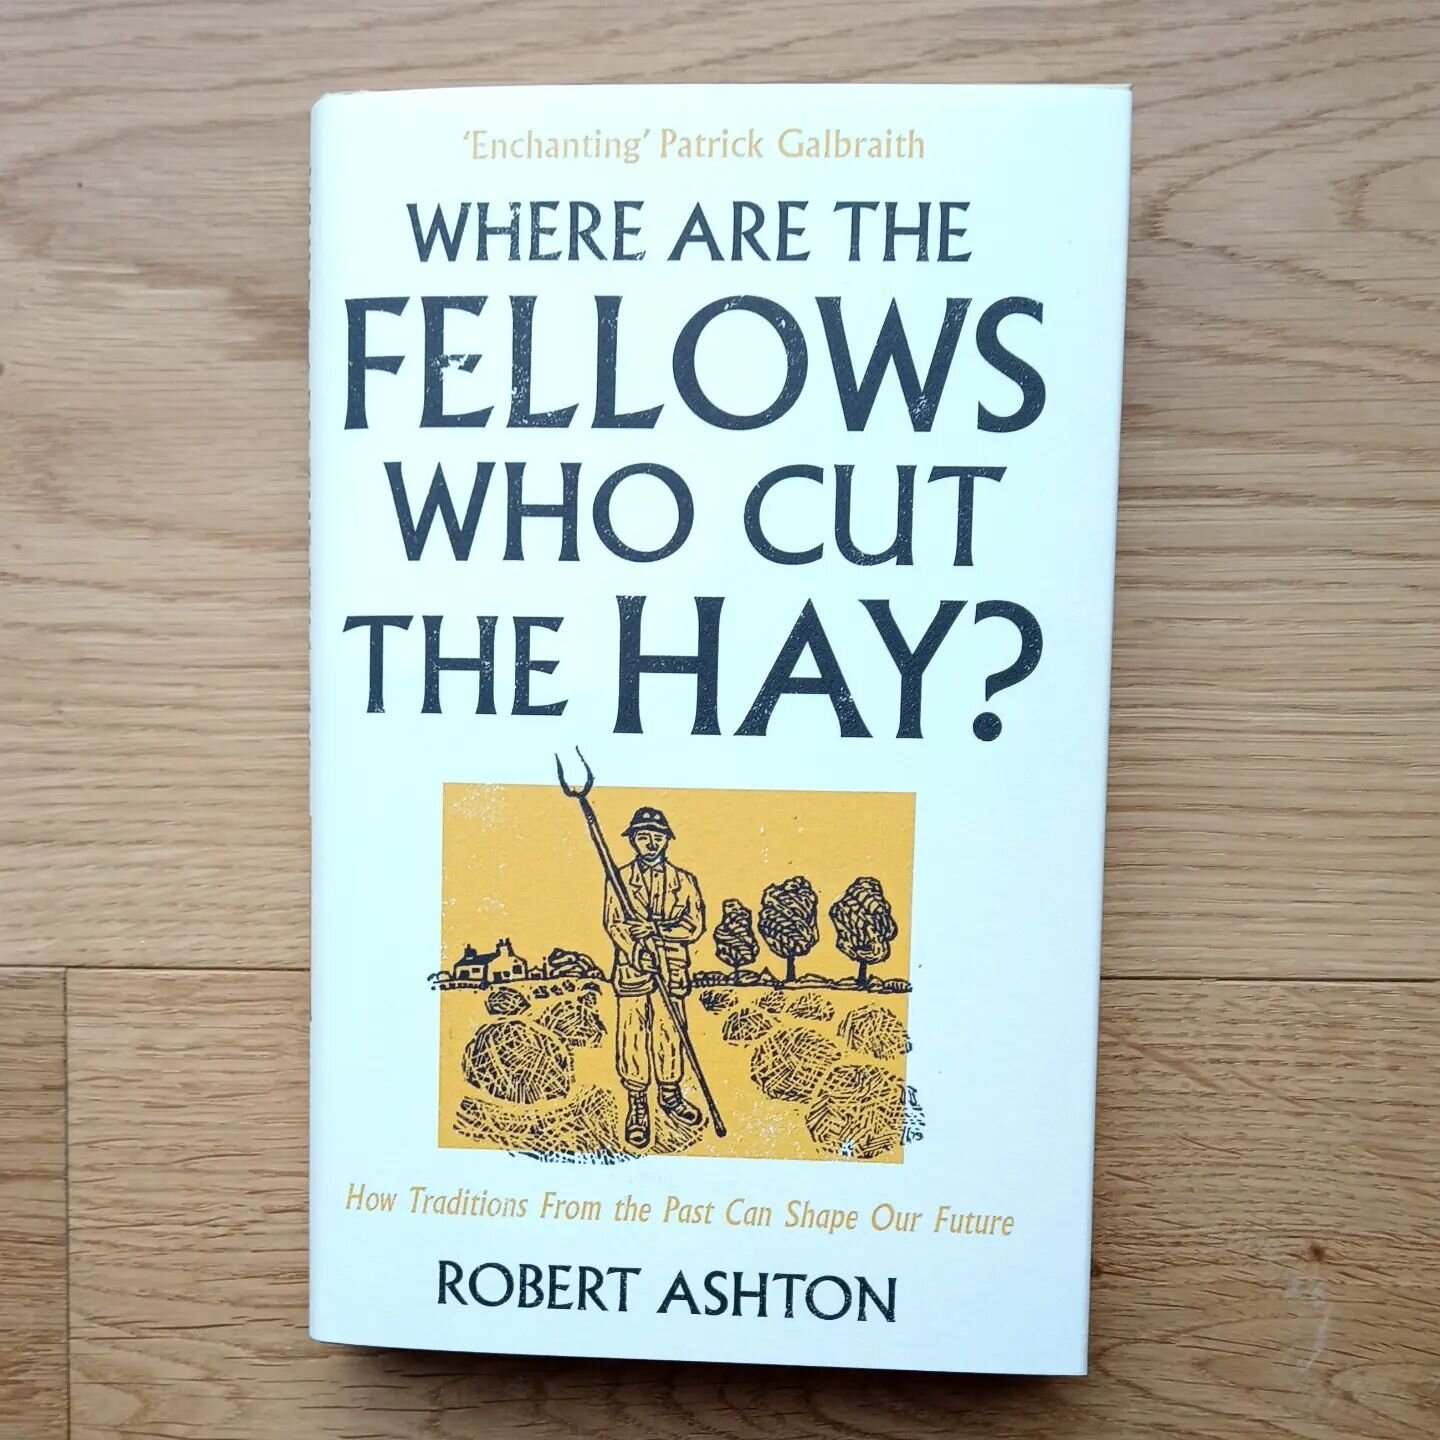 So proud of Robert, as today his latest book is published by Unbound.

It is based on the book &quot;Ask the fellows who cut the hay&quot; by George Ewart Evans which used oral history to talk about the changes in rural life between 1900 and 1950s.

